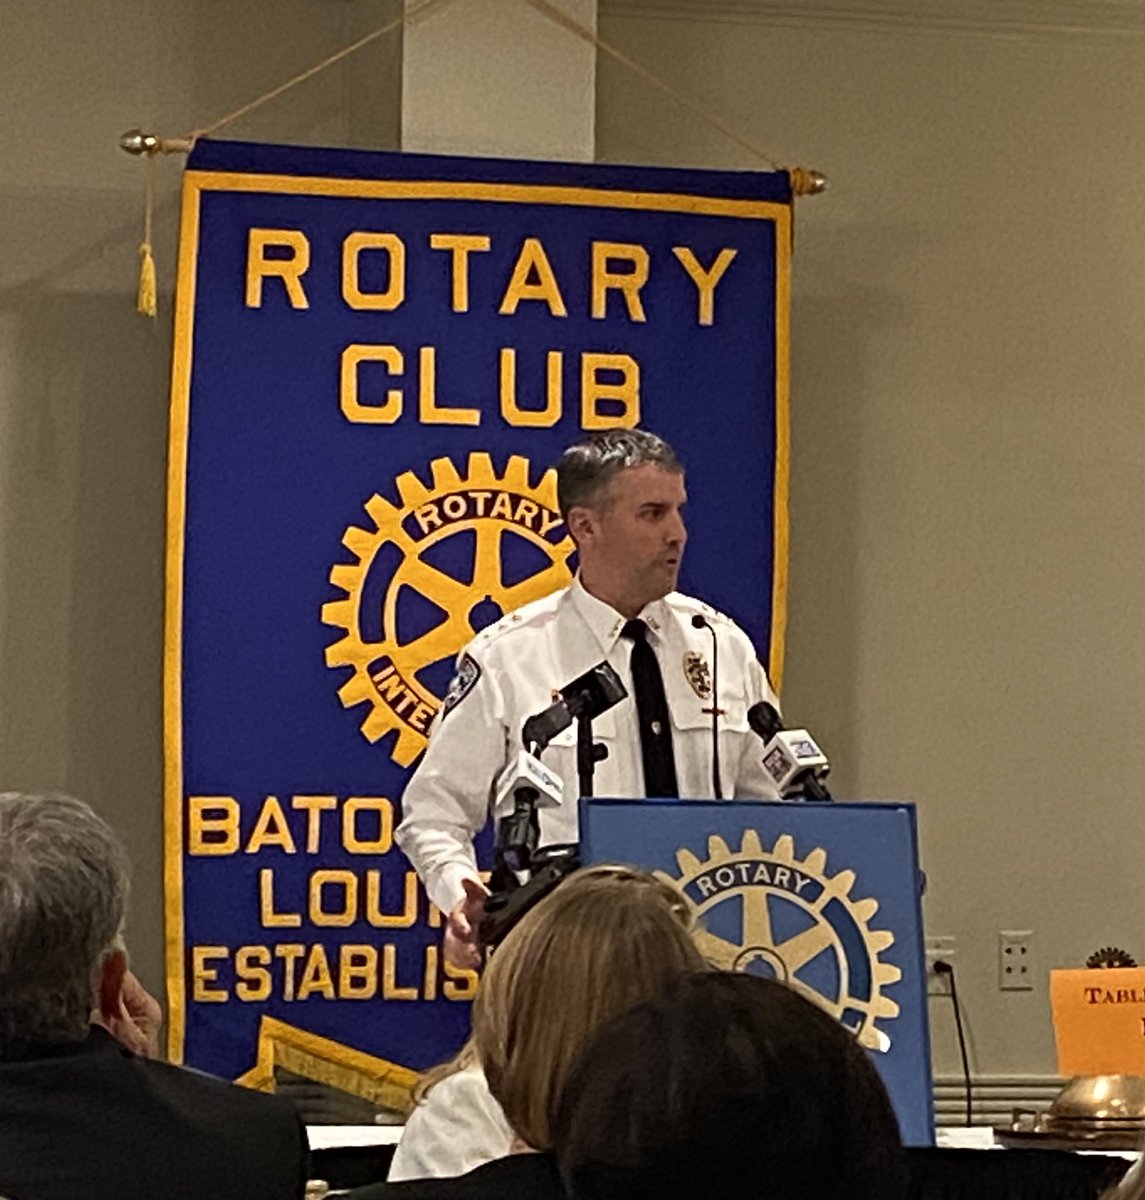 What a fascinating insight into Chief of Police Thomas Morse’s first 100 days in his role as leader of the #BatonRouge force. The mantra: Gather, Gain, Give. He is an alumnus of #LSU & previously led the Canine Unit — an inspiration! #Rotary #BetteringLives #WeProtect #LSUVetMed